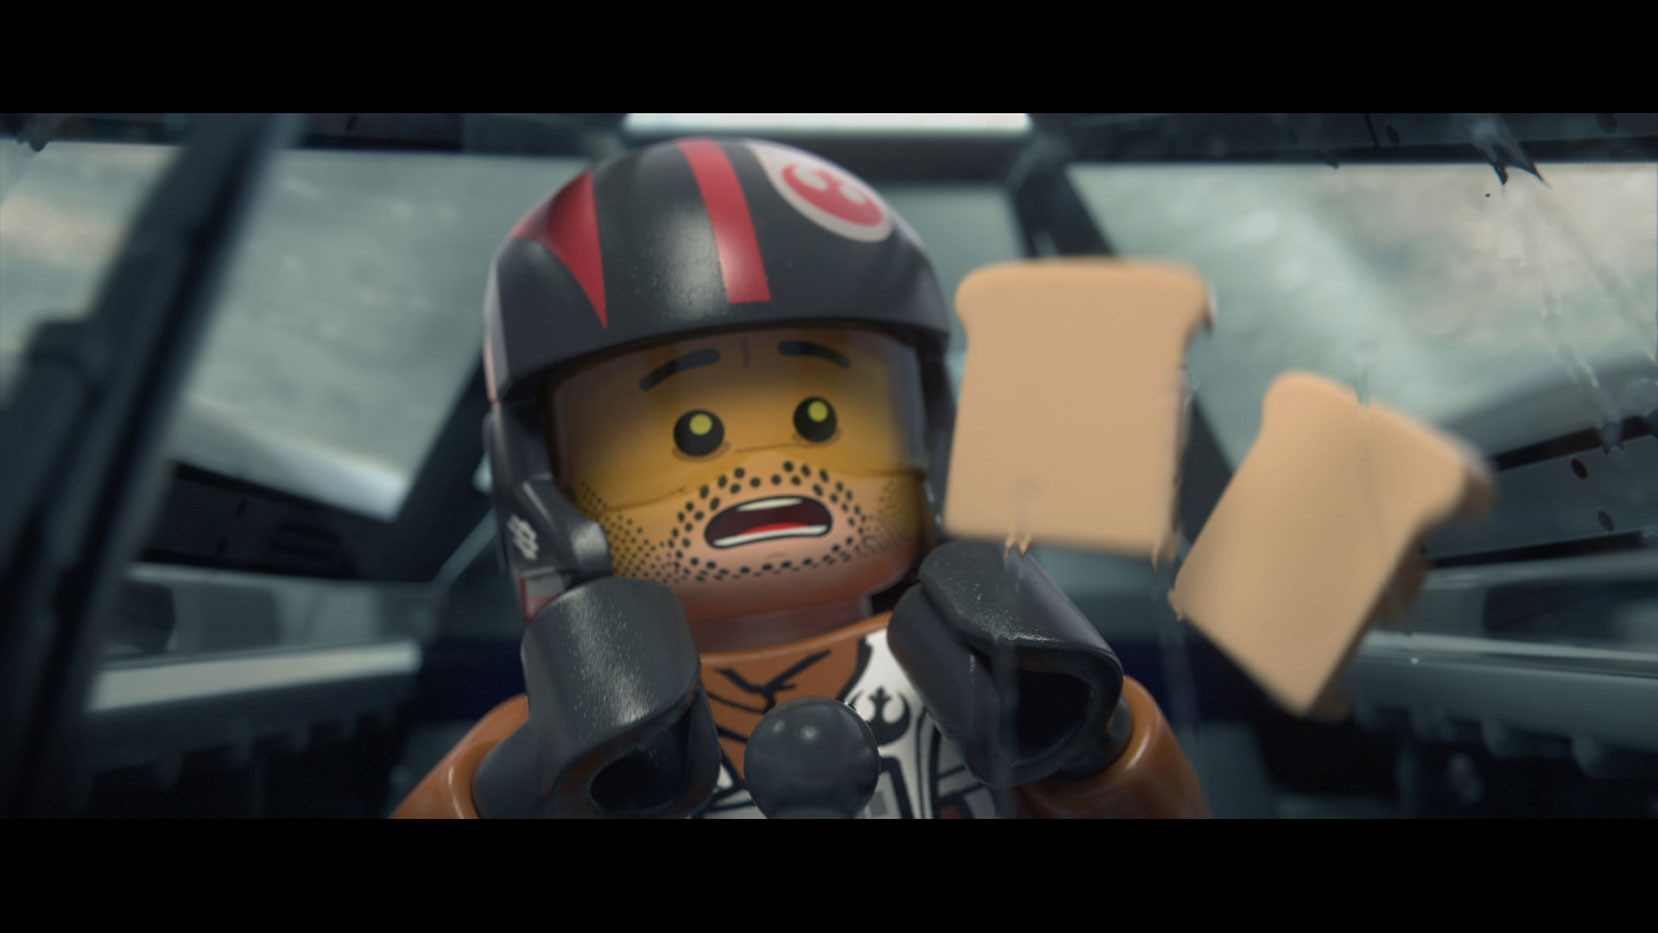 Lego Star Wars The Force Awakens Activation Key